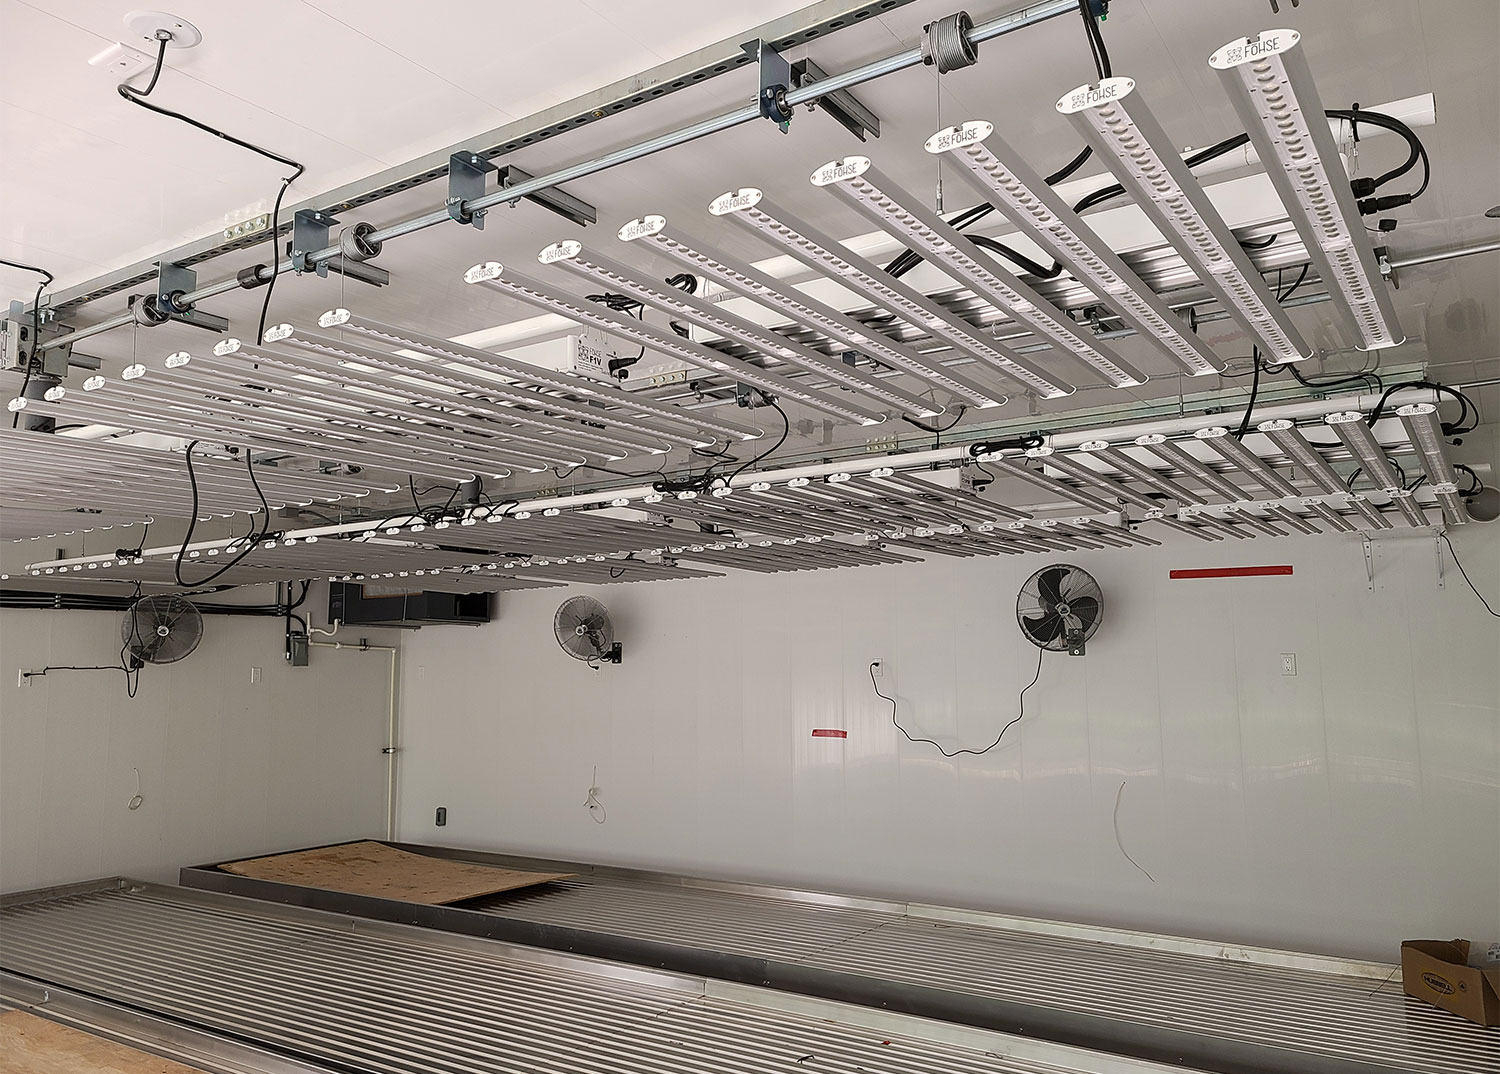 installation of lift and grow's cannabis light lifting technology